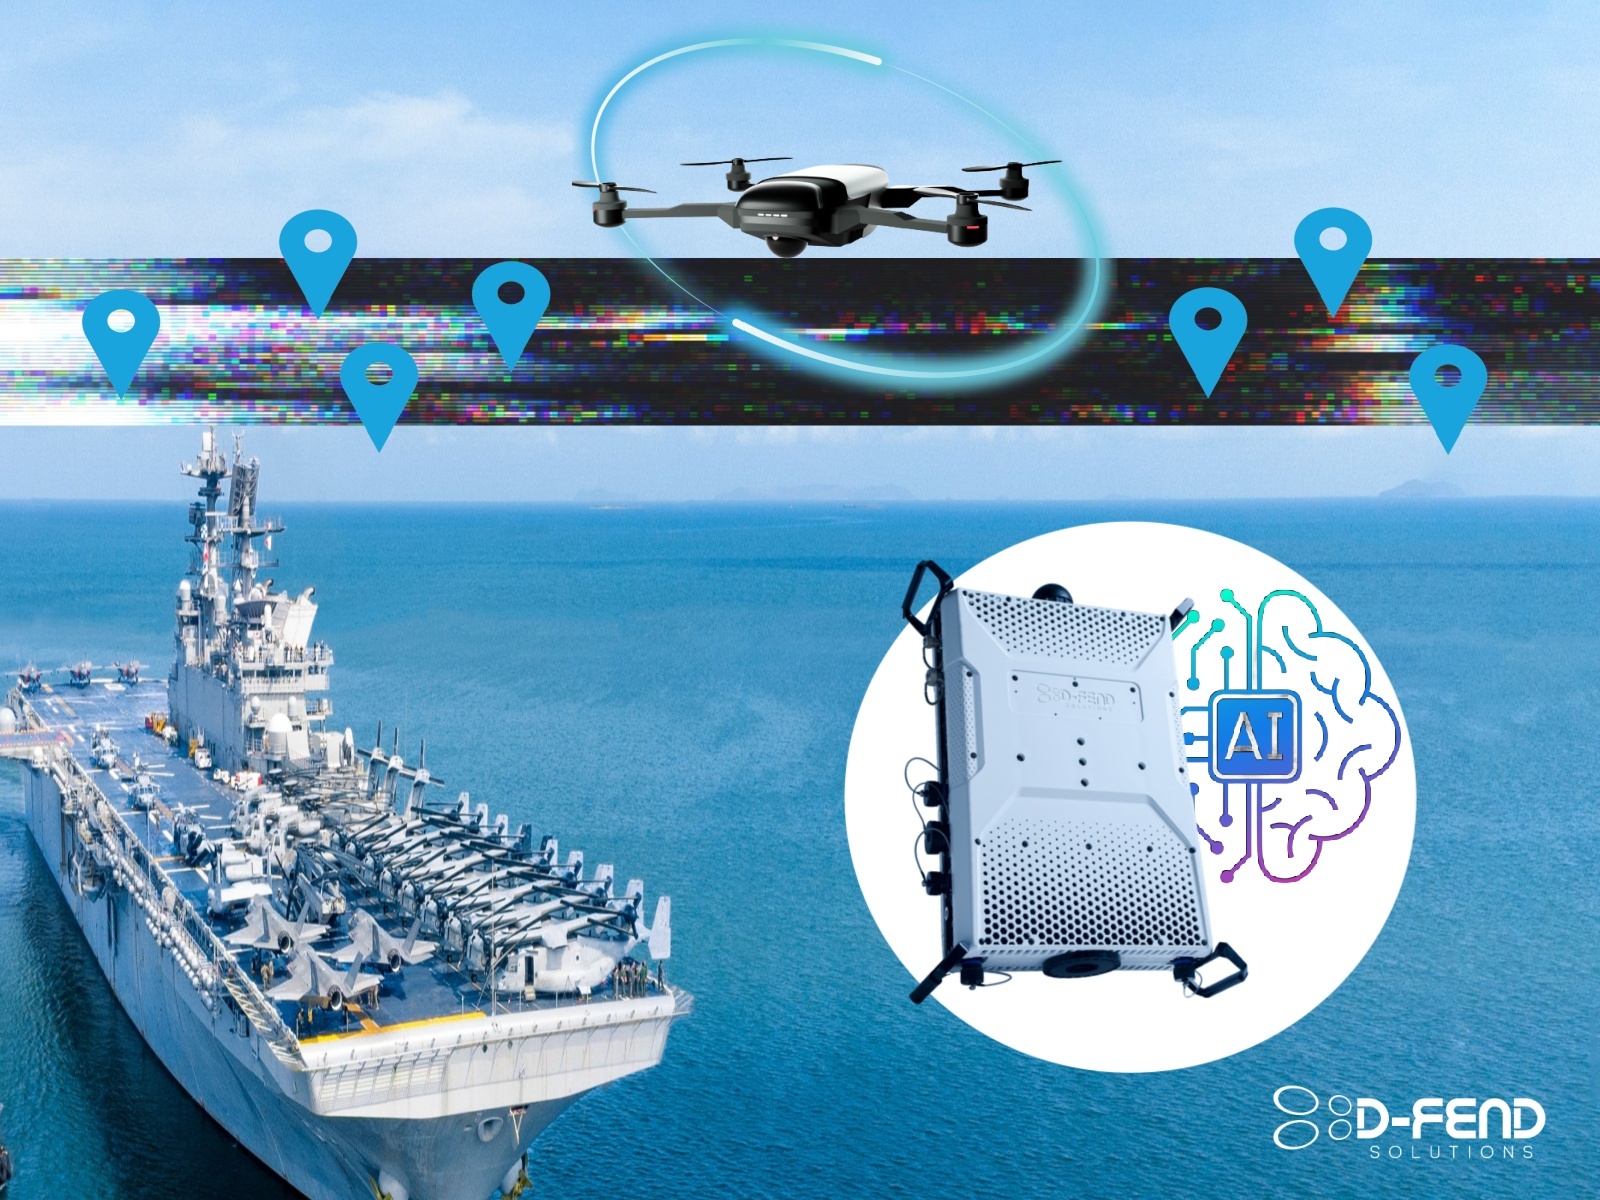 D-Fend Solutions Upgrades EnforceAir2 C-UAS with AI and "Disrupted Environments Mode"